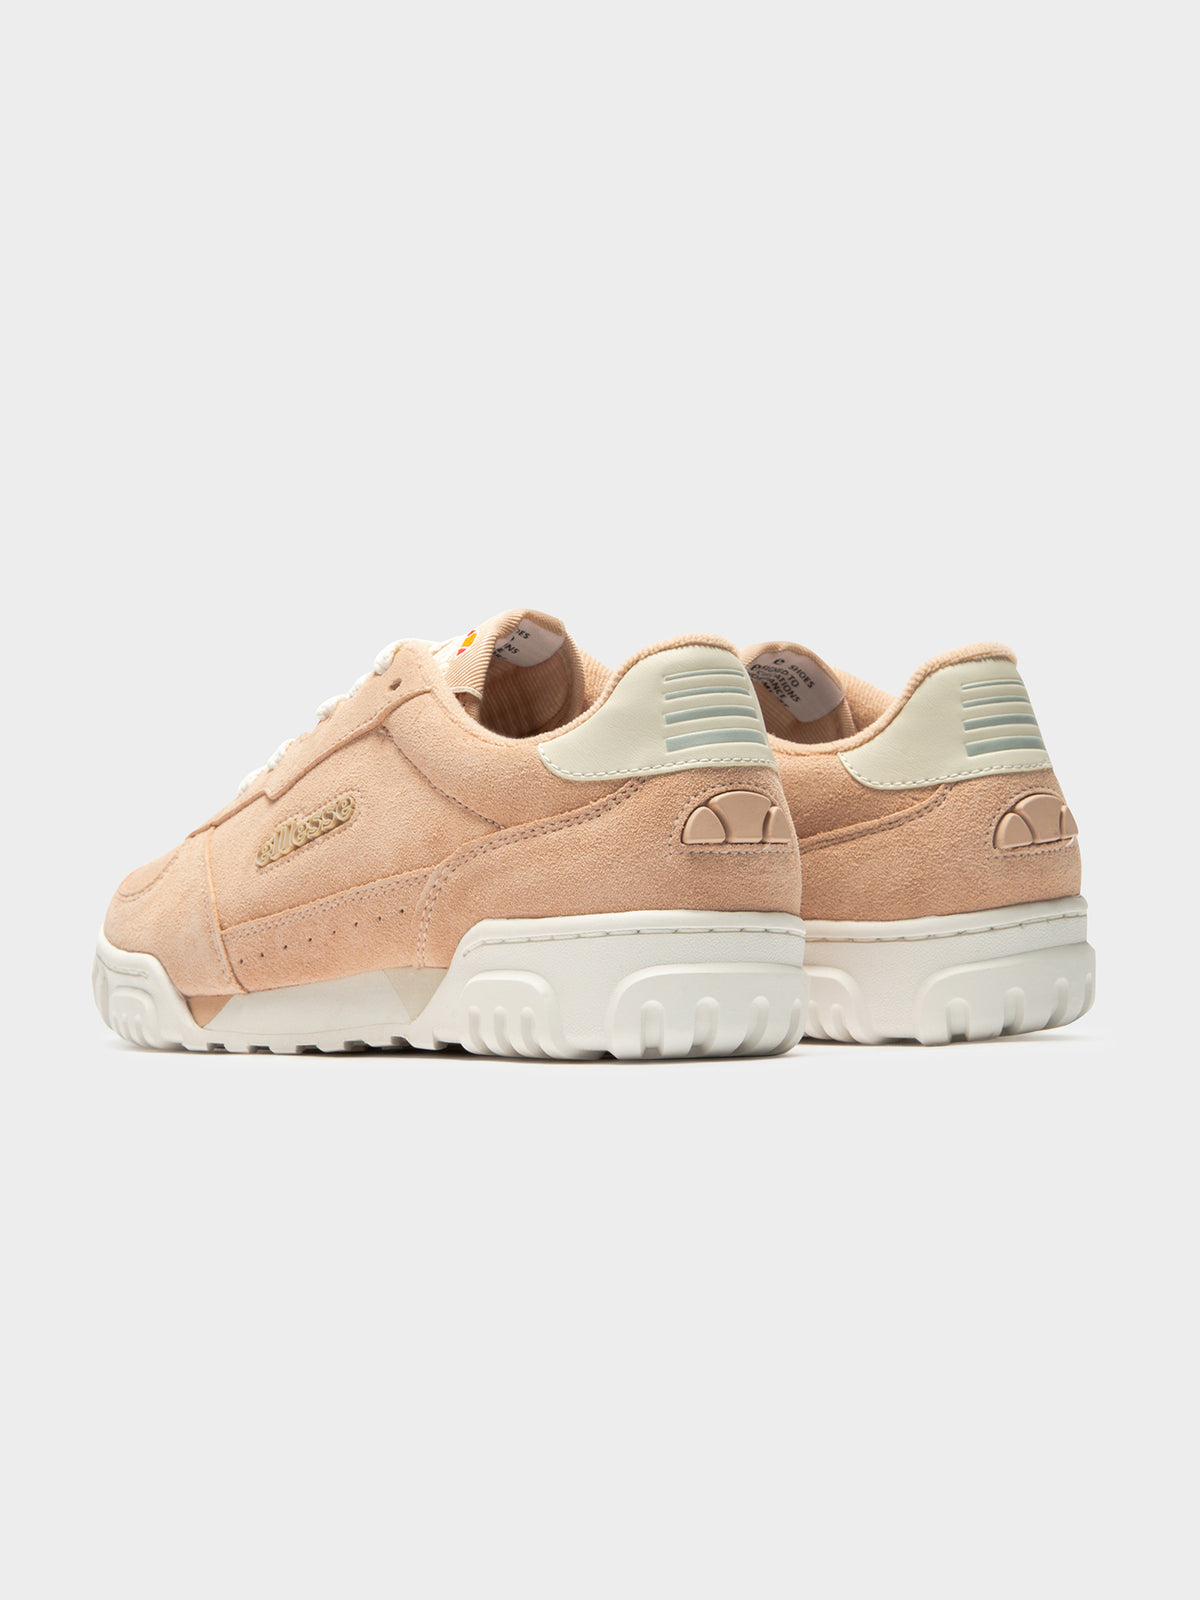 Womens Lo Tanker Sneakers in Natural Suede